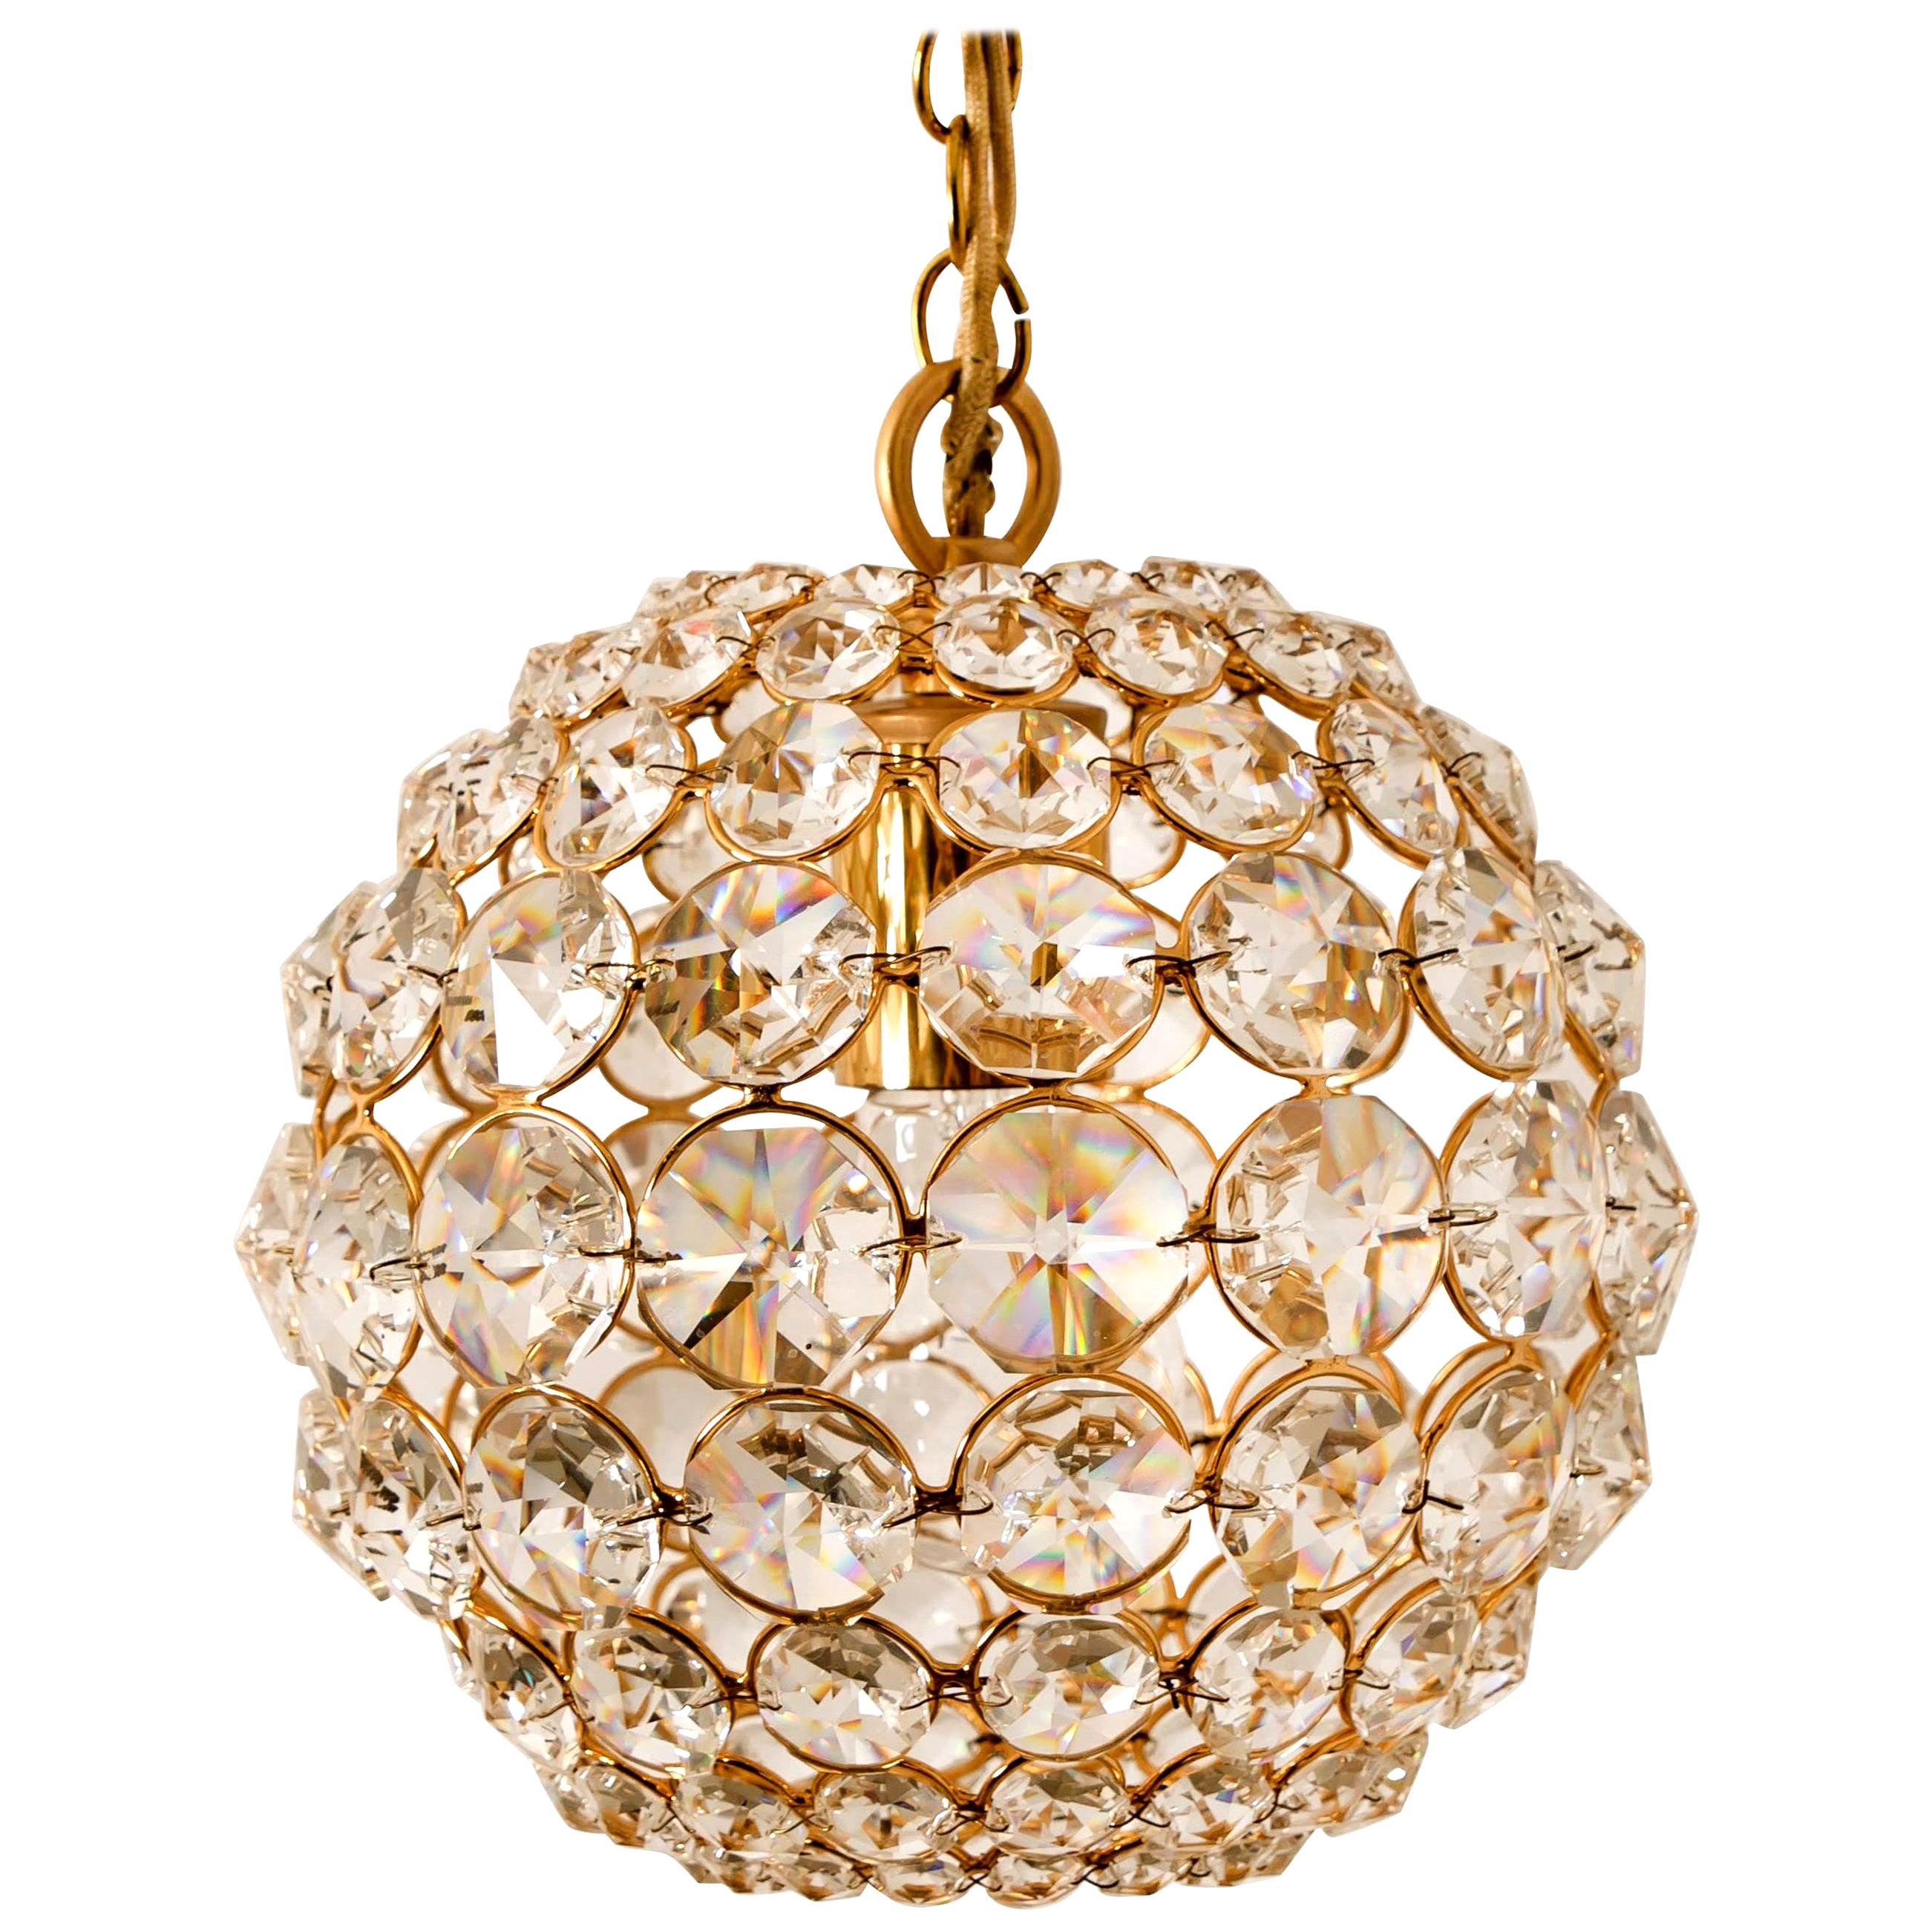 Small Gold-Plated Brass and Crystal Pendant Lamp from Palwa, 1960s